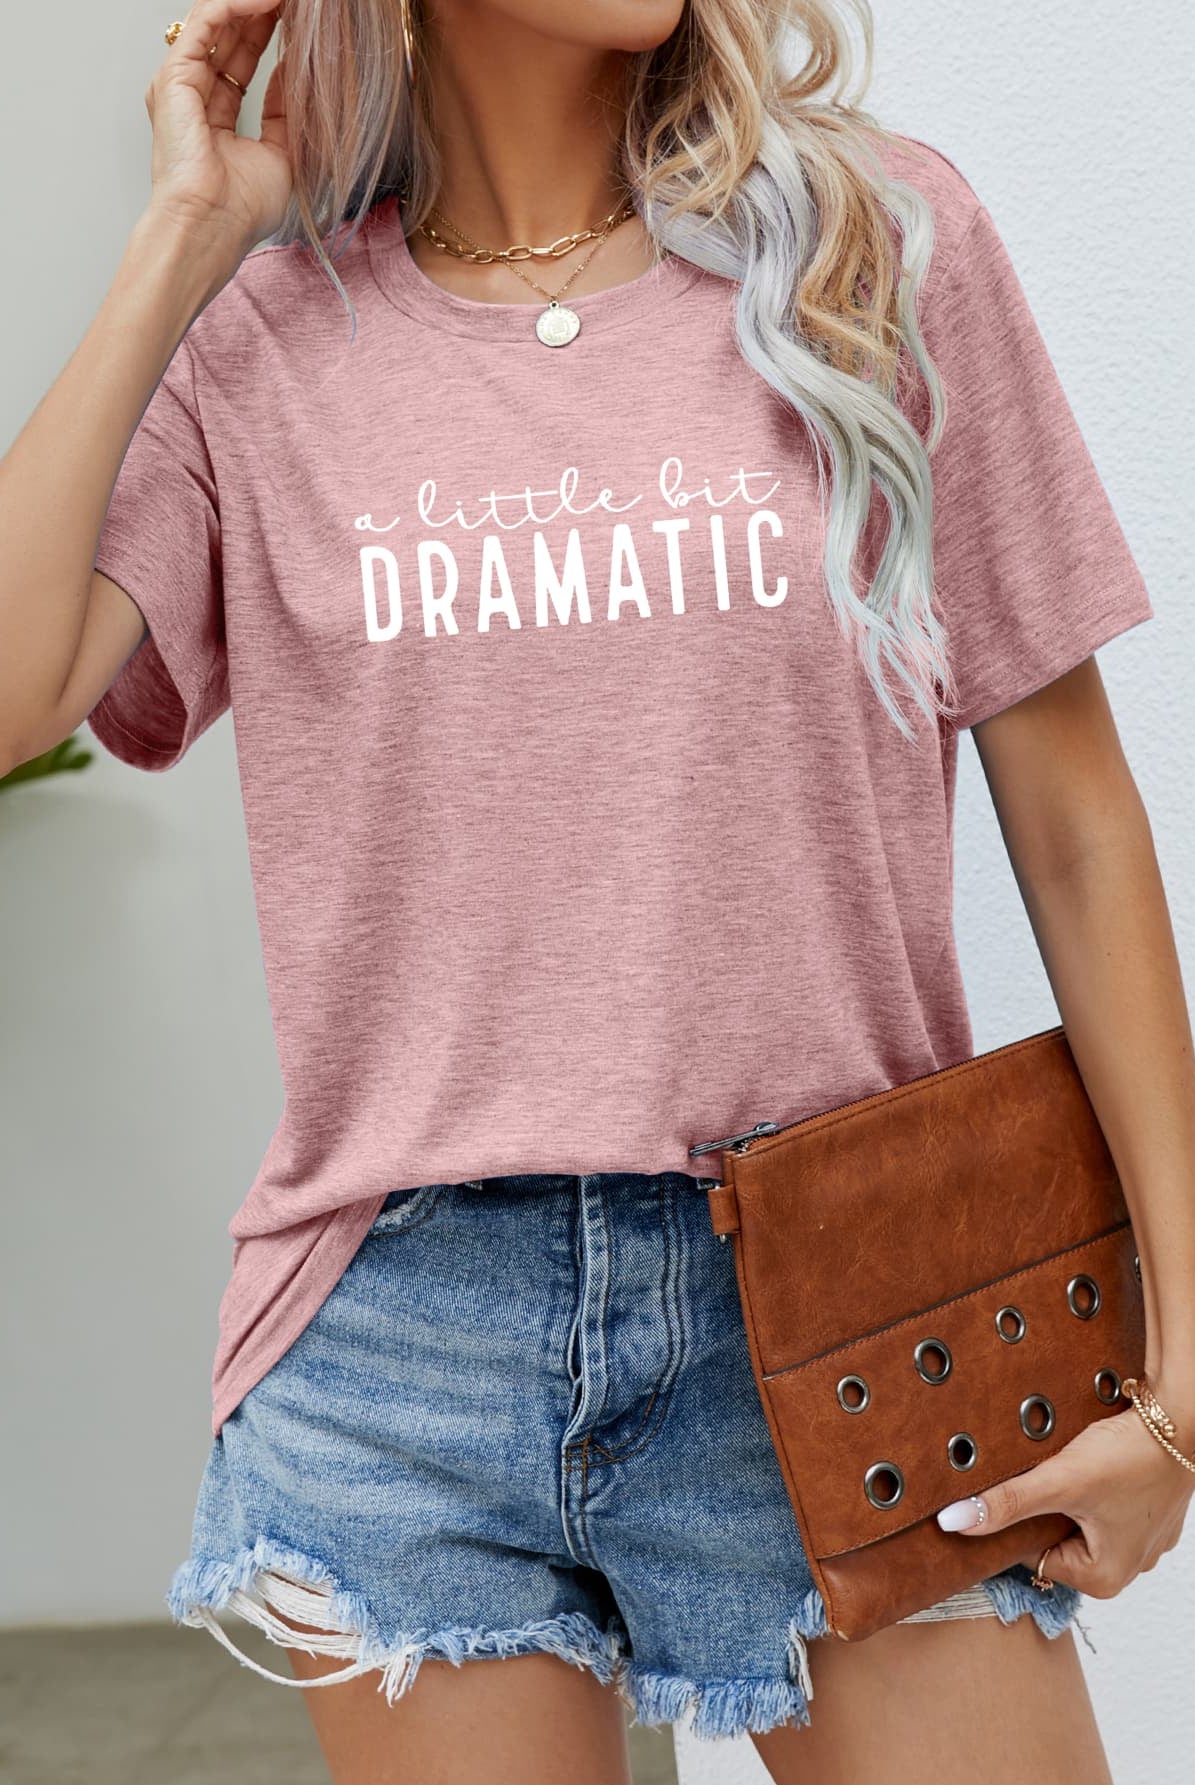 Rosy Brown A LITTLE BIT DRAMATIC Graphic Tee T-Shirts